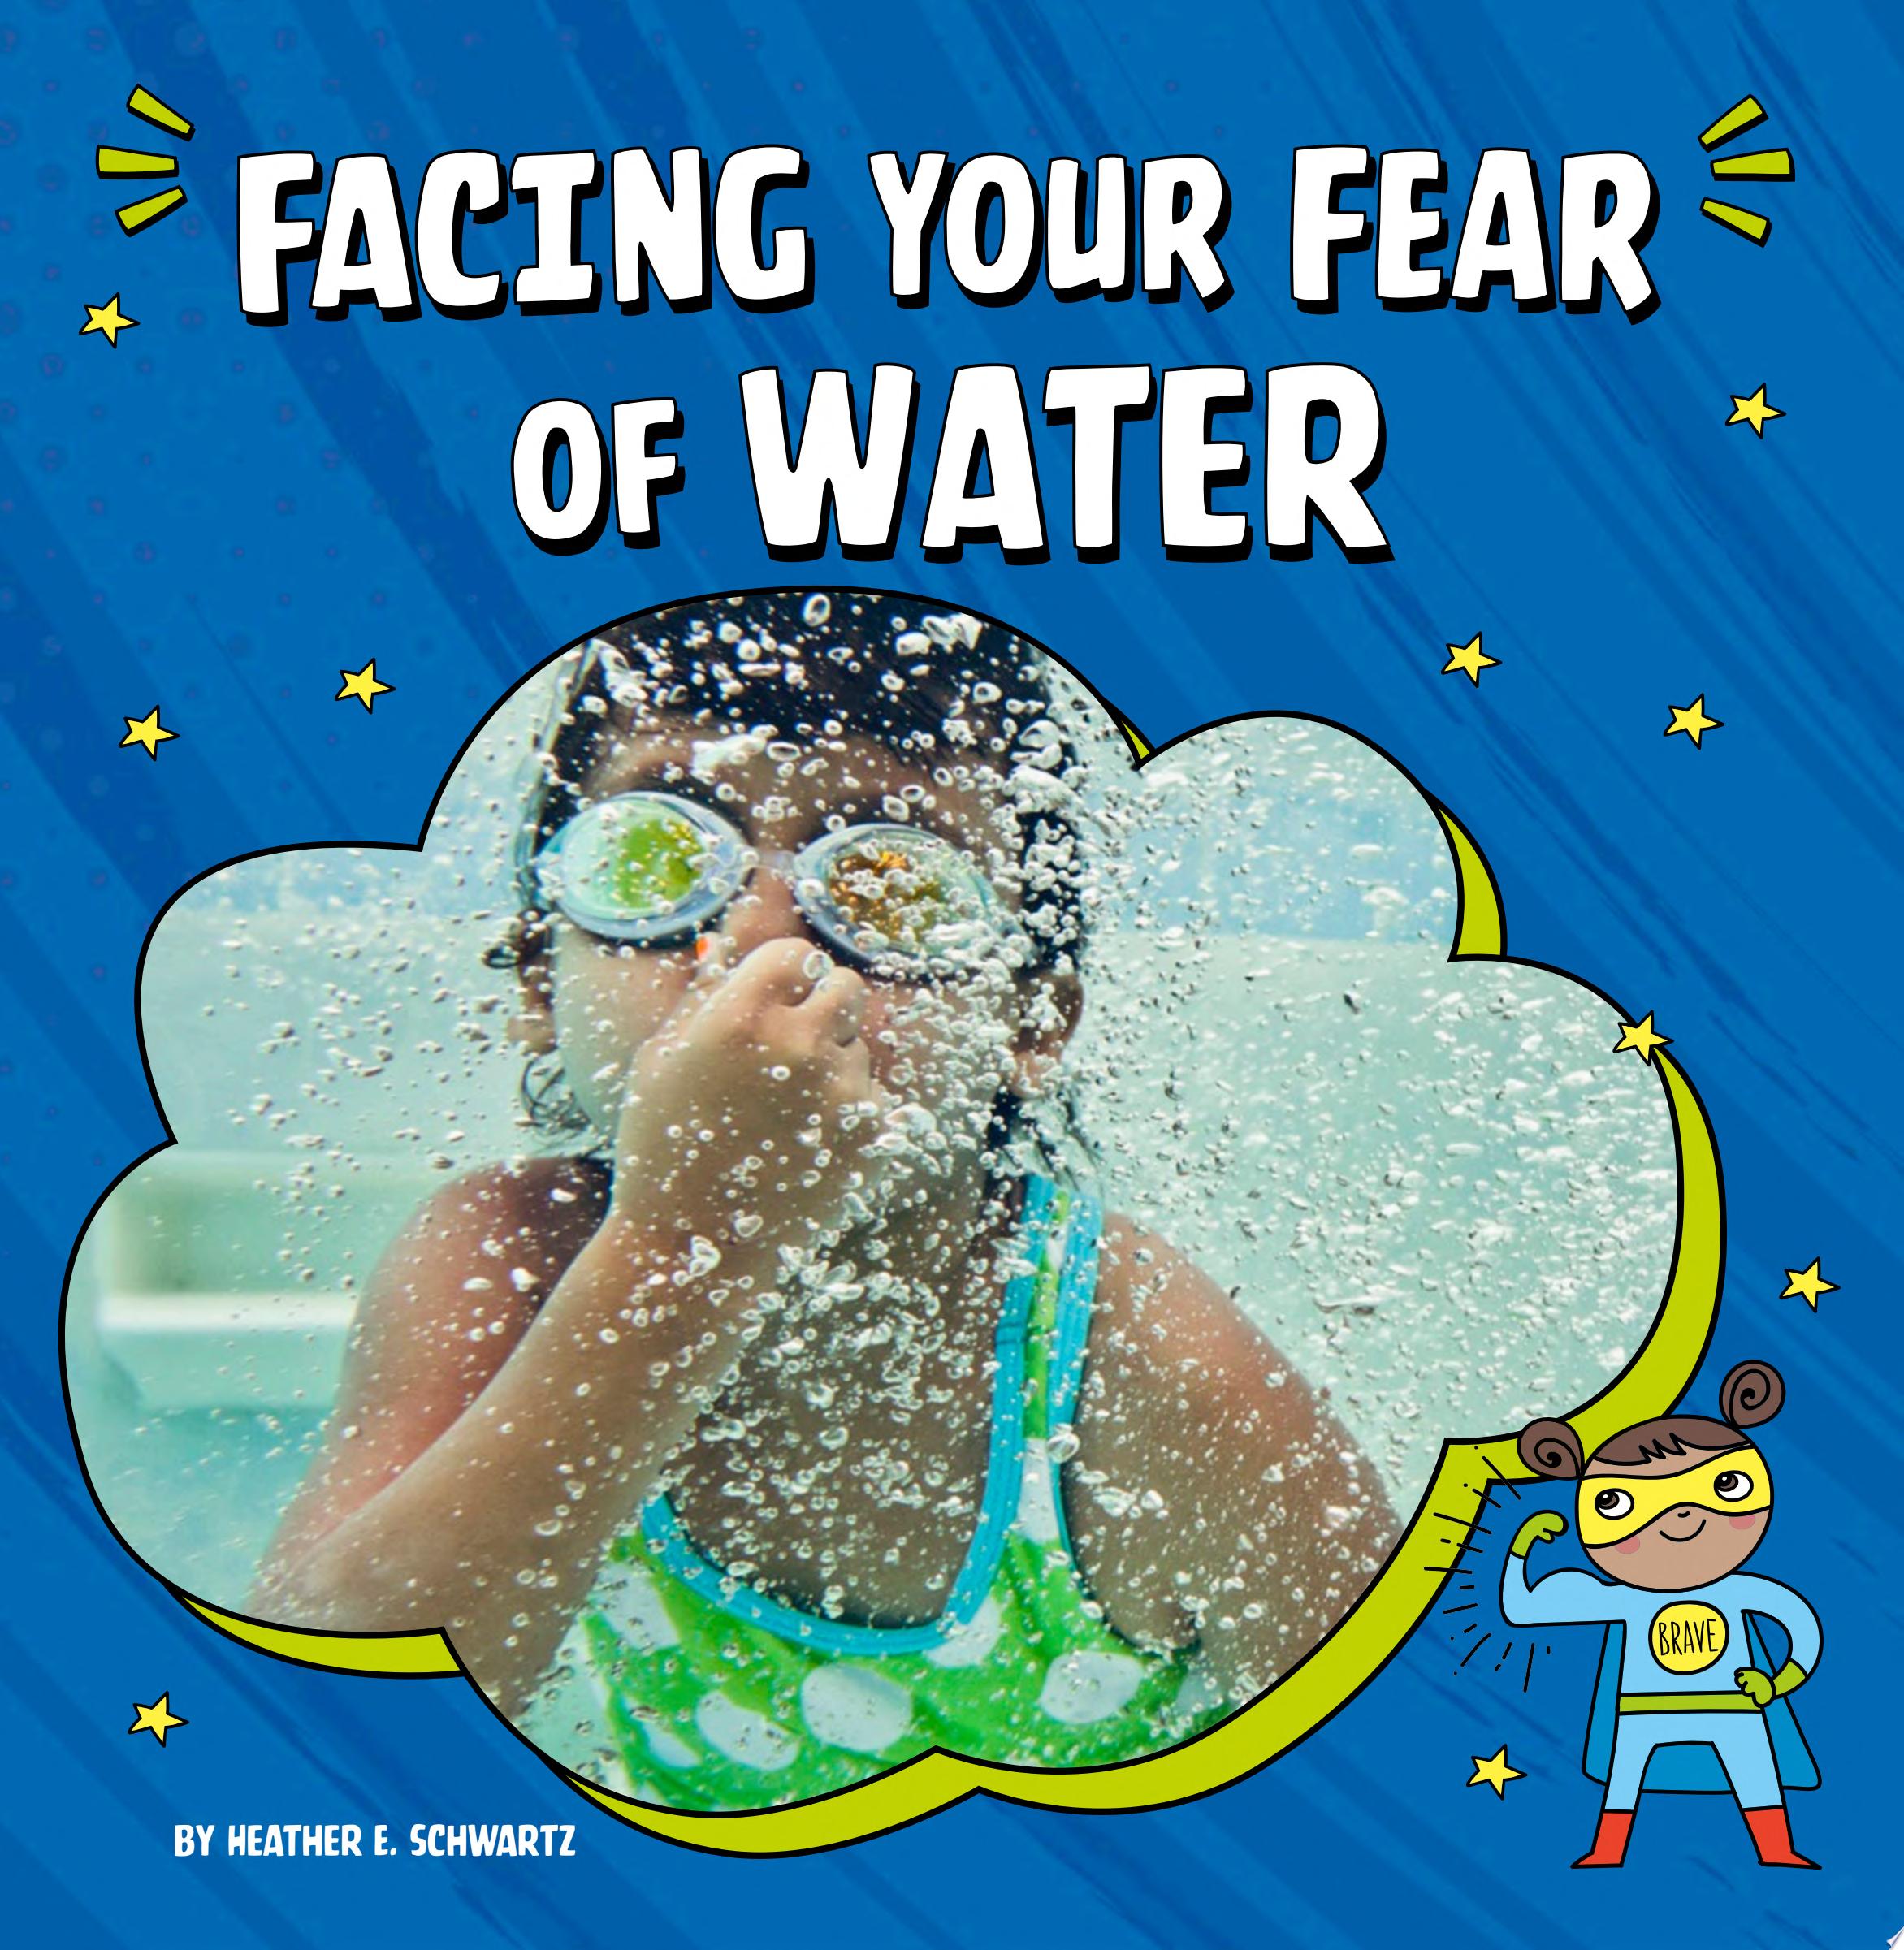 Image for "Facing Your Fear of Water"